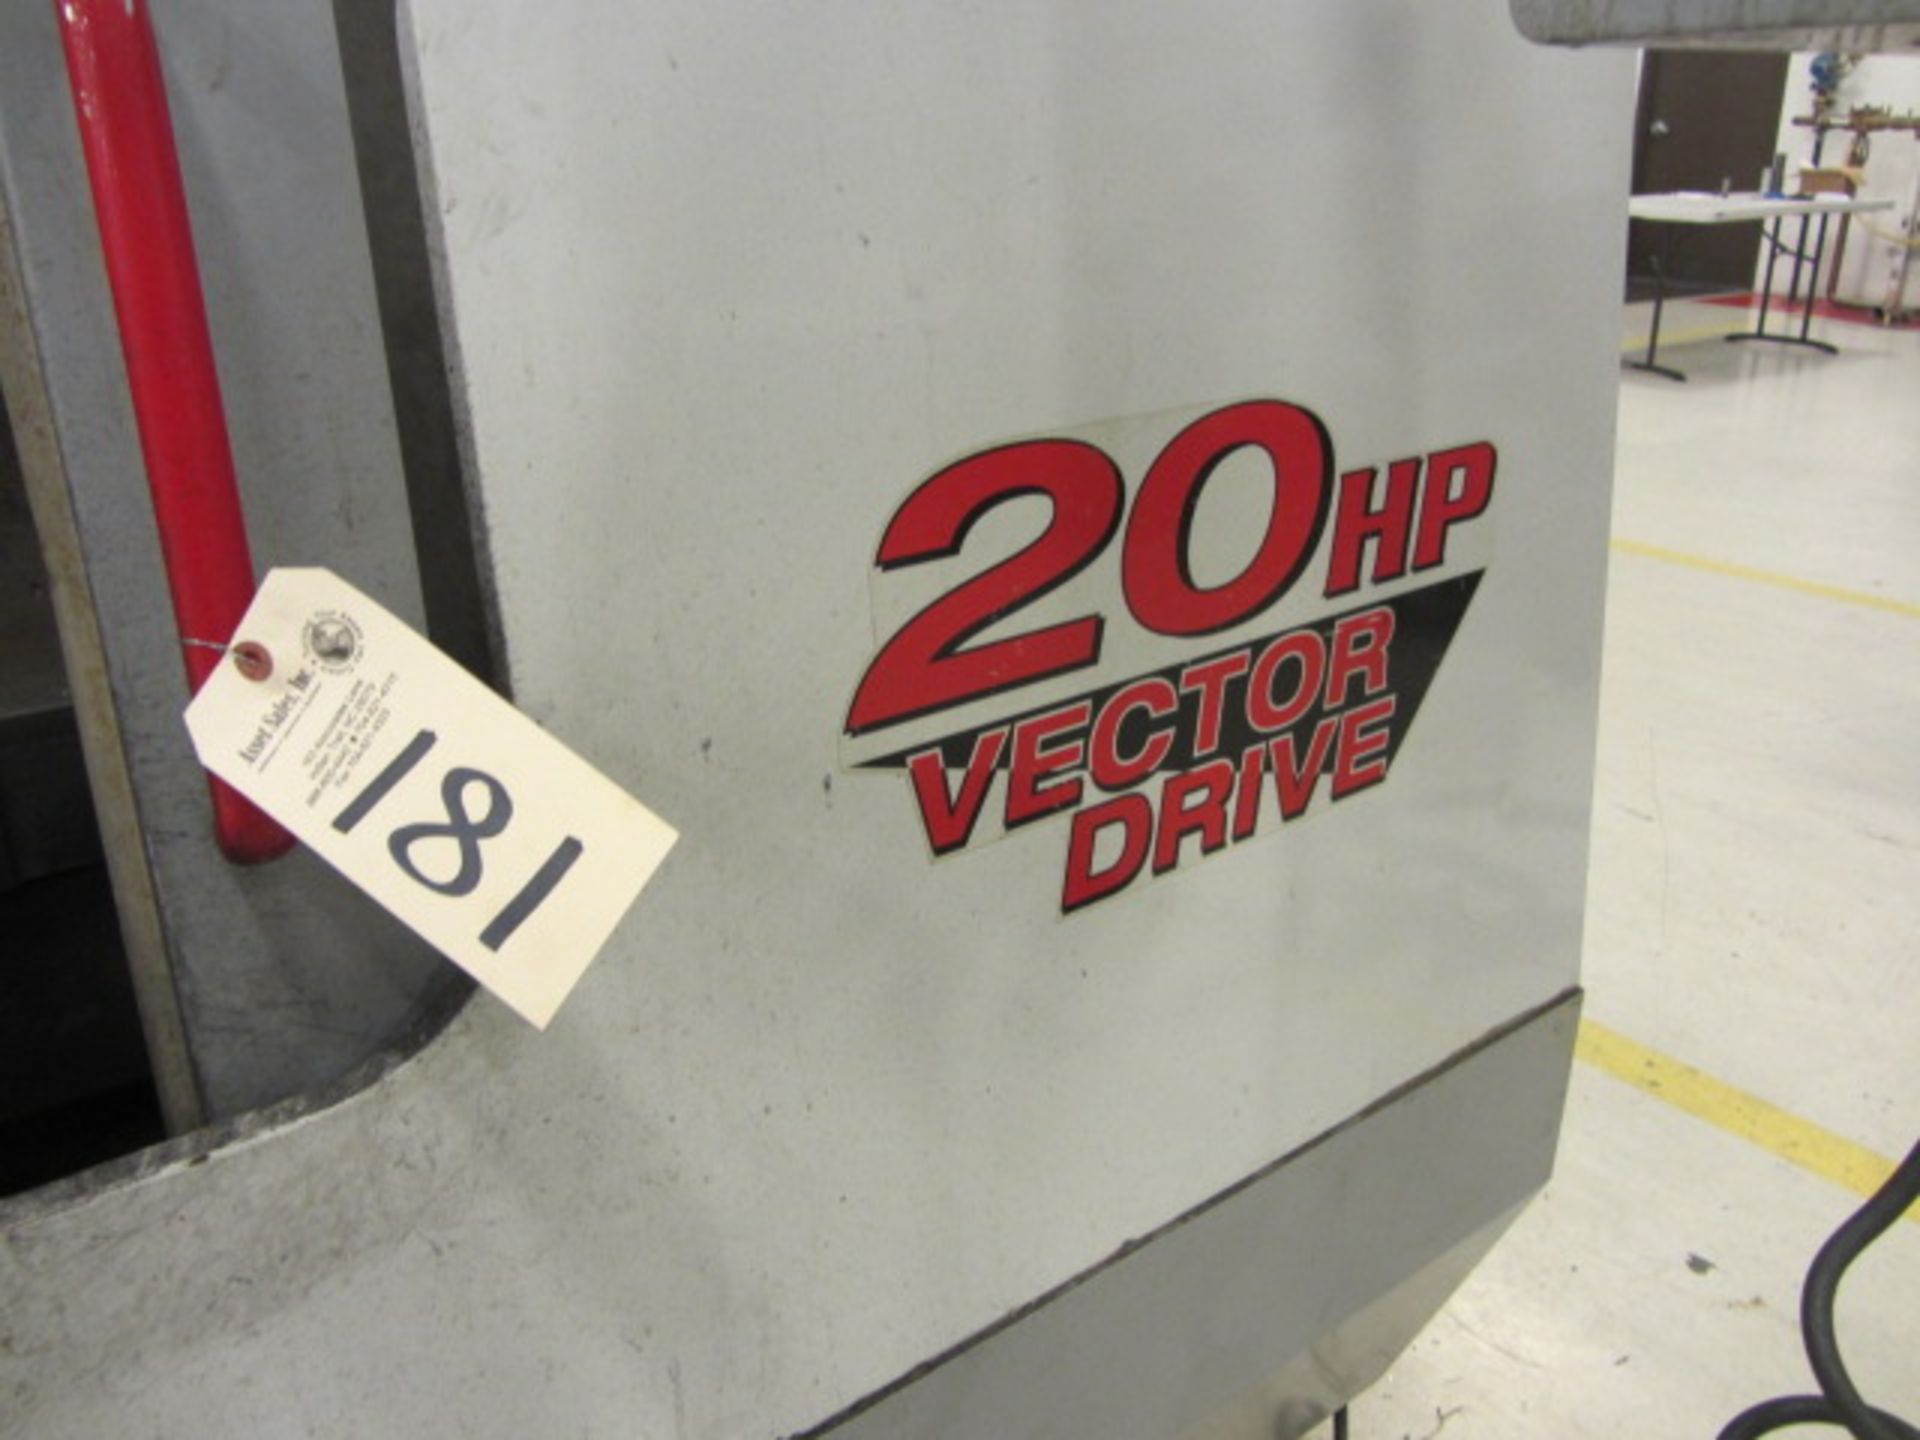 Haas VF-3B CNC Vertical Machining Center with 48'' x 18'' Table, #40 Taper Spindle Speeds to 7500 - Image 2 of 7